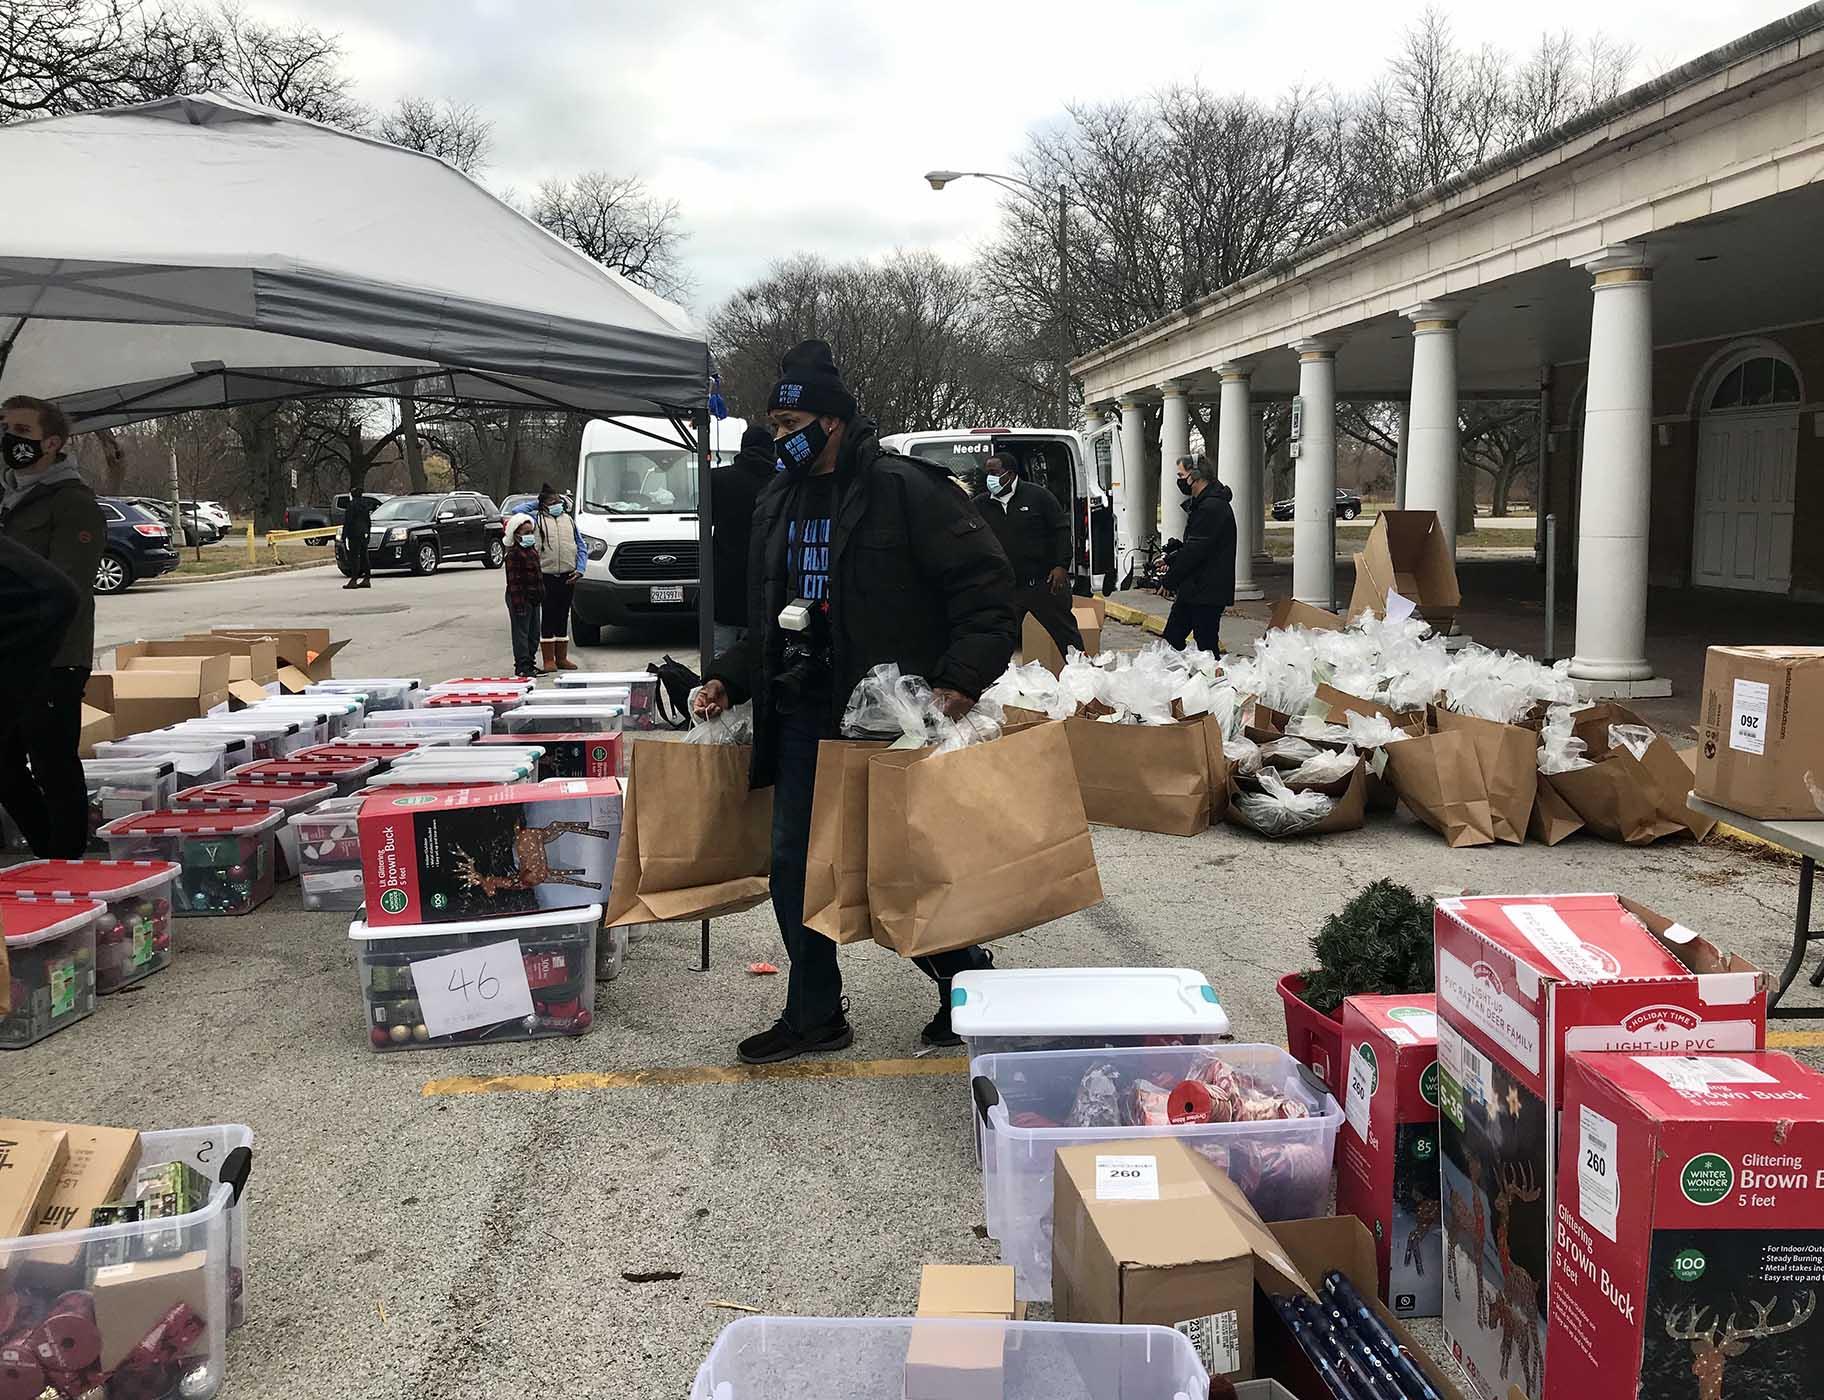 Volunteers distribute a mass of holiday lights, wreaths, ornaments and other decor. (Ariel Parrella-Aureli / WTTW News)